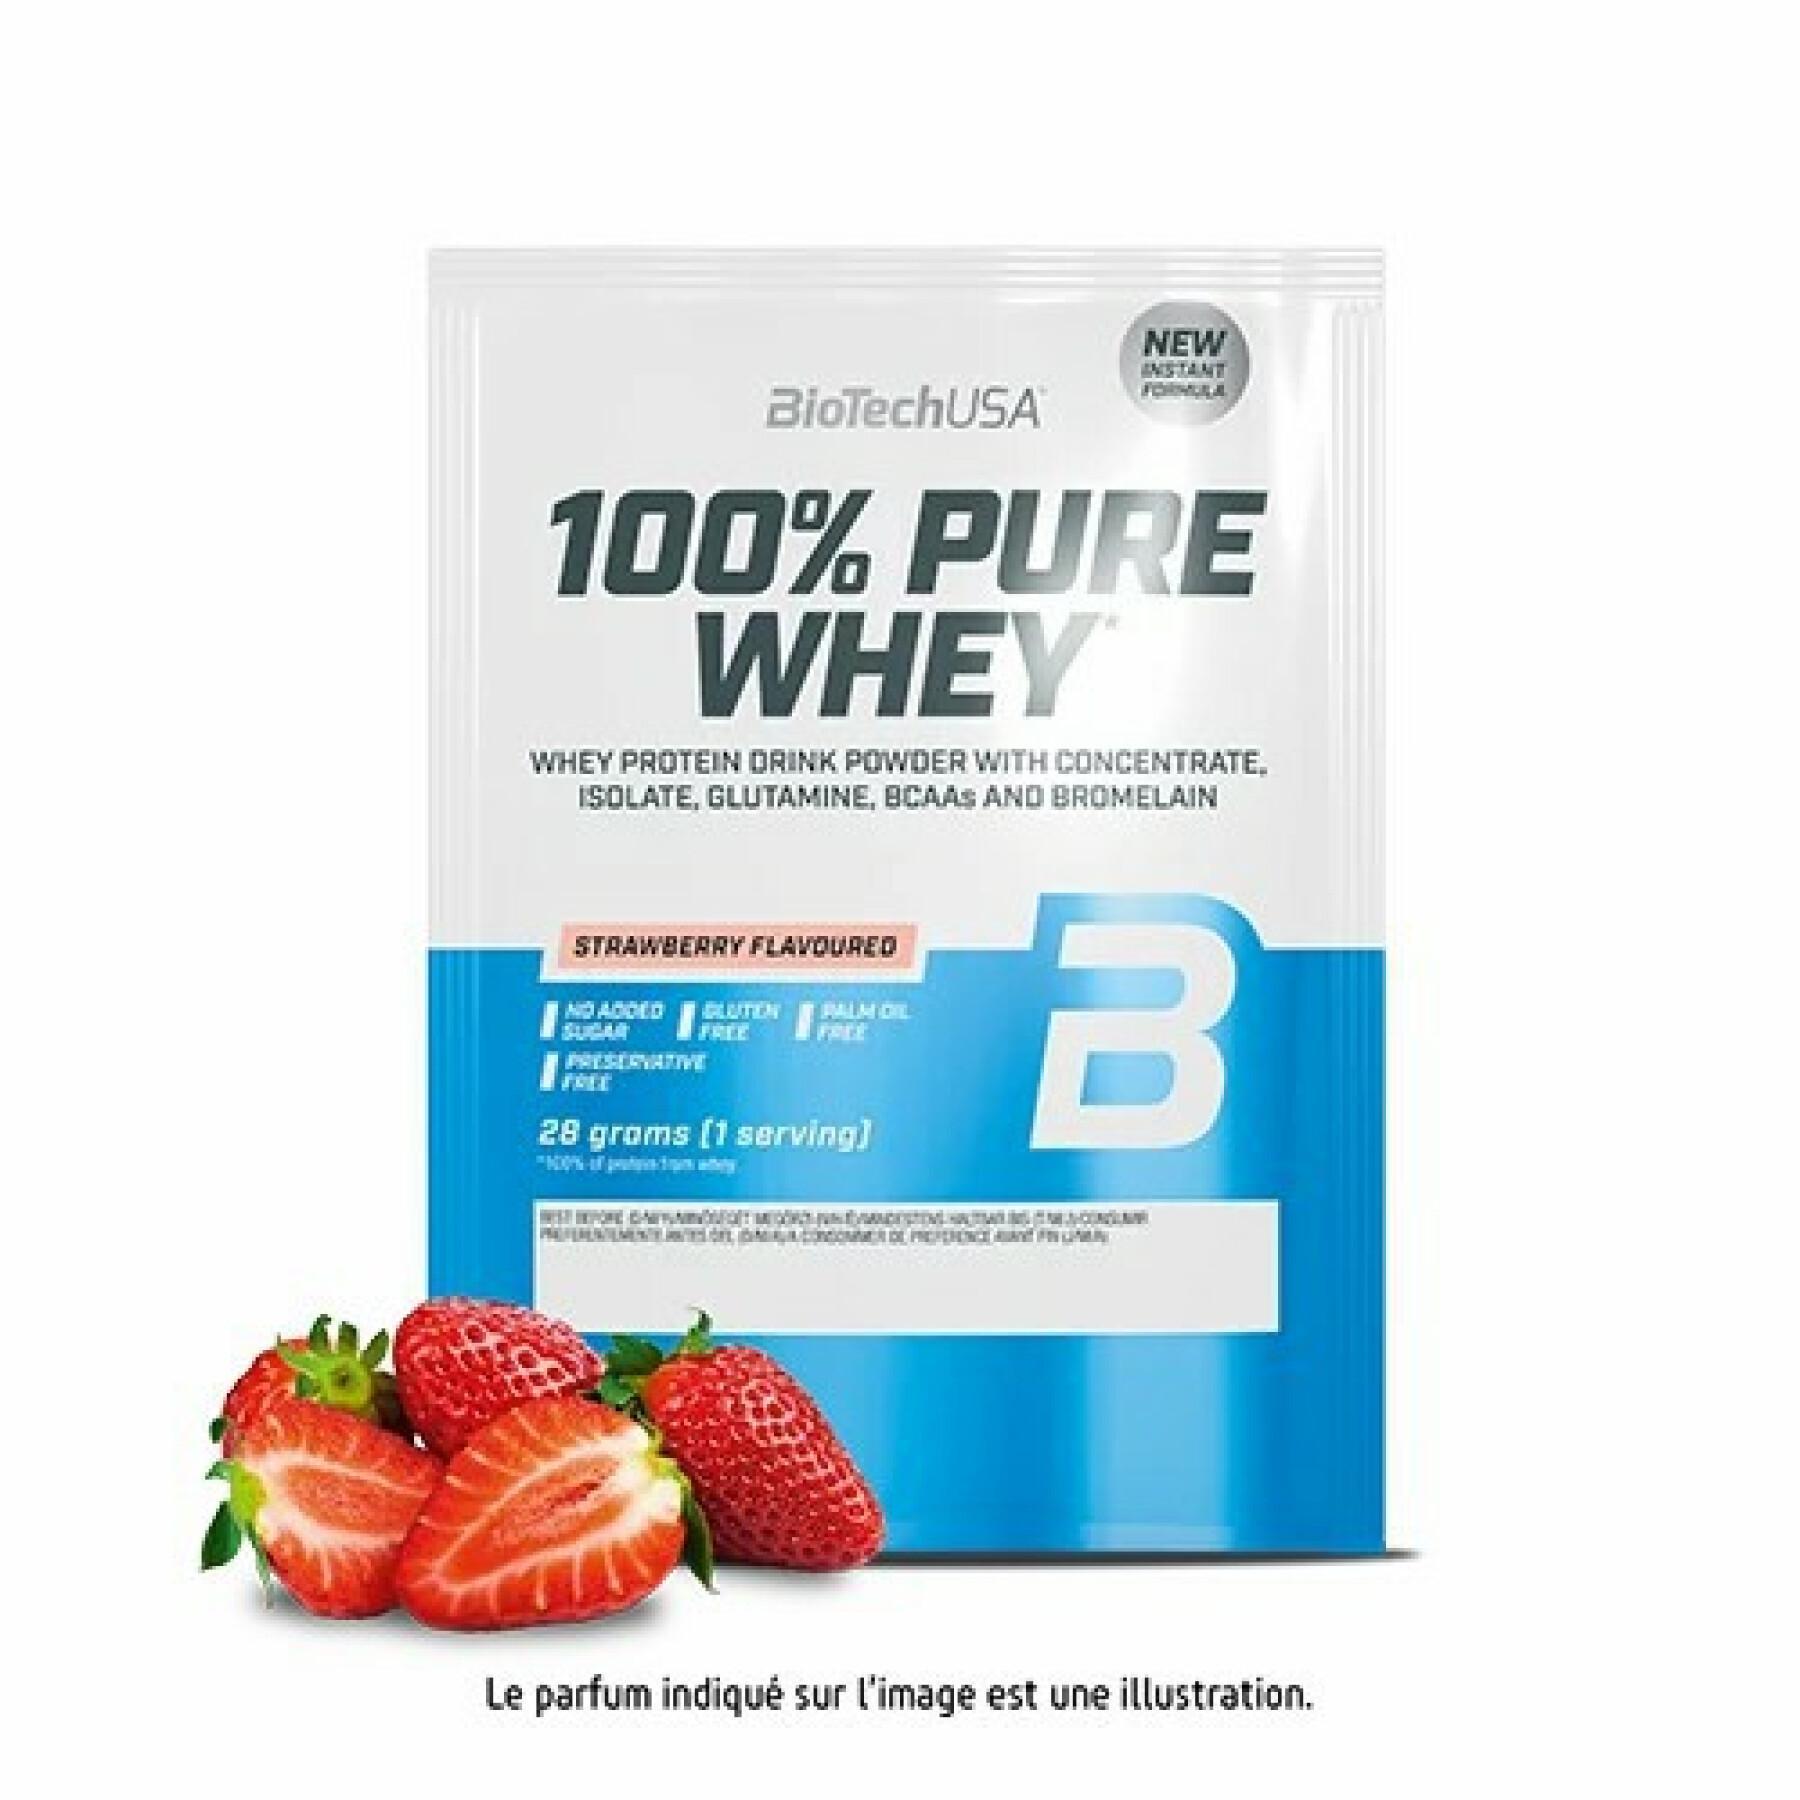 50 packets of 100% pure whey protein Biotech USA - Fraise - 28g